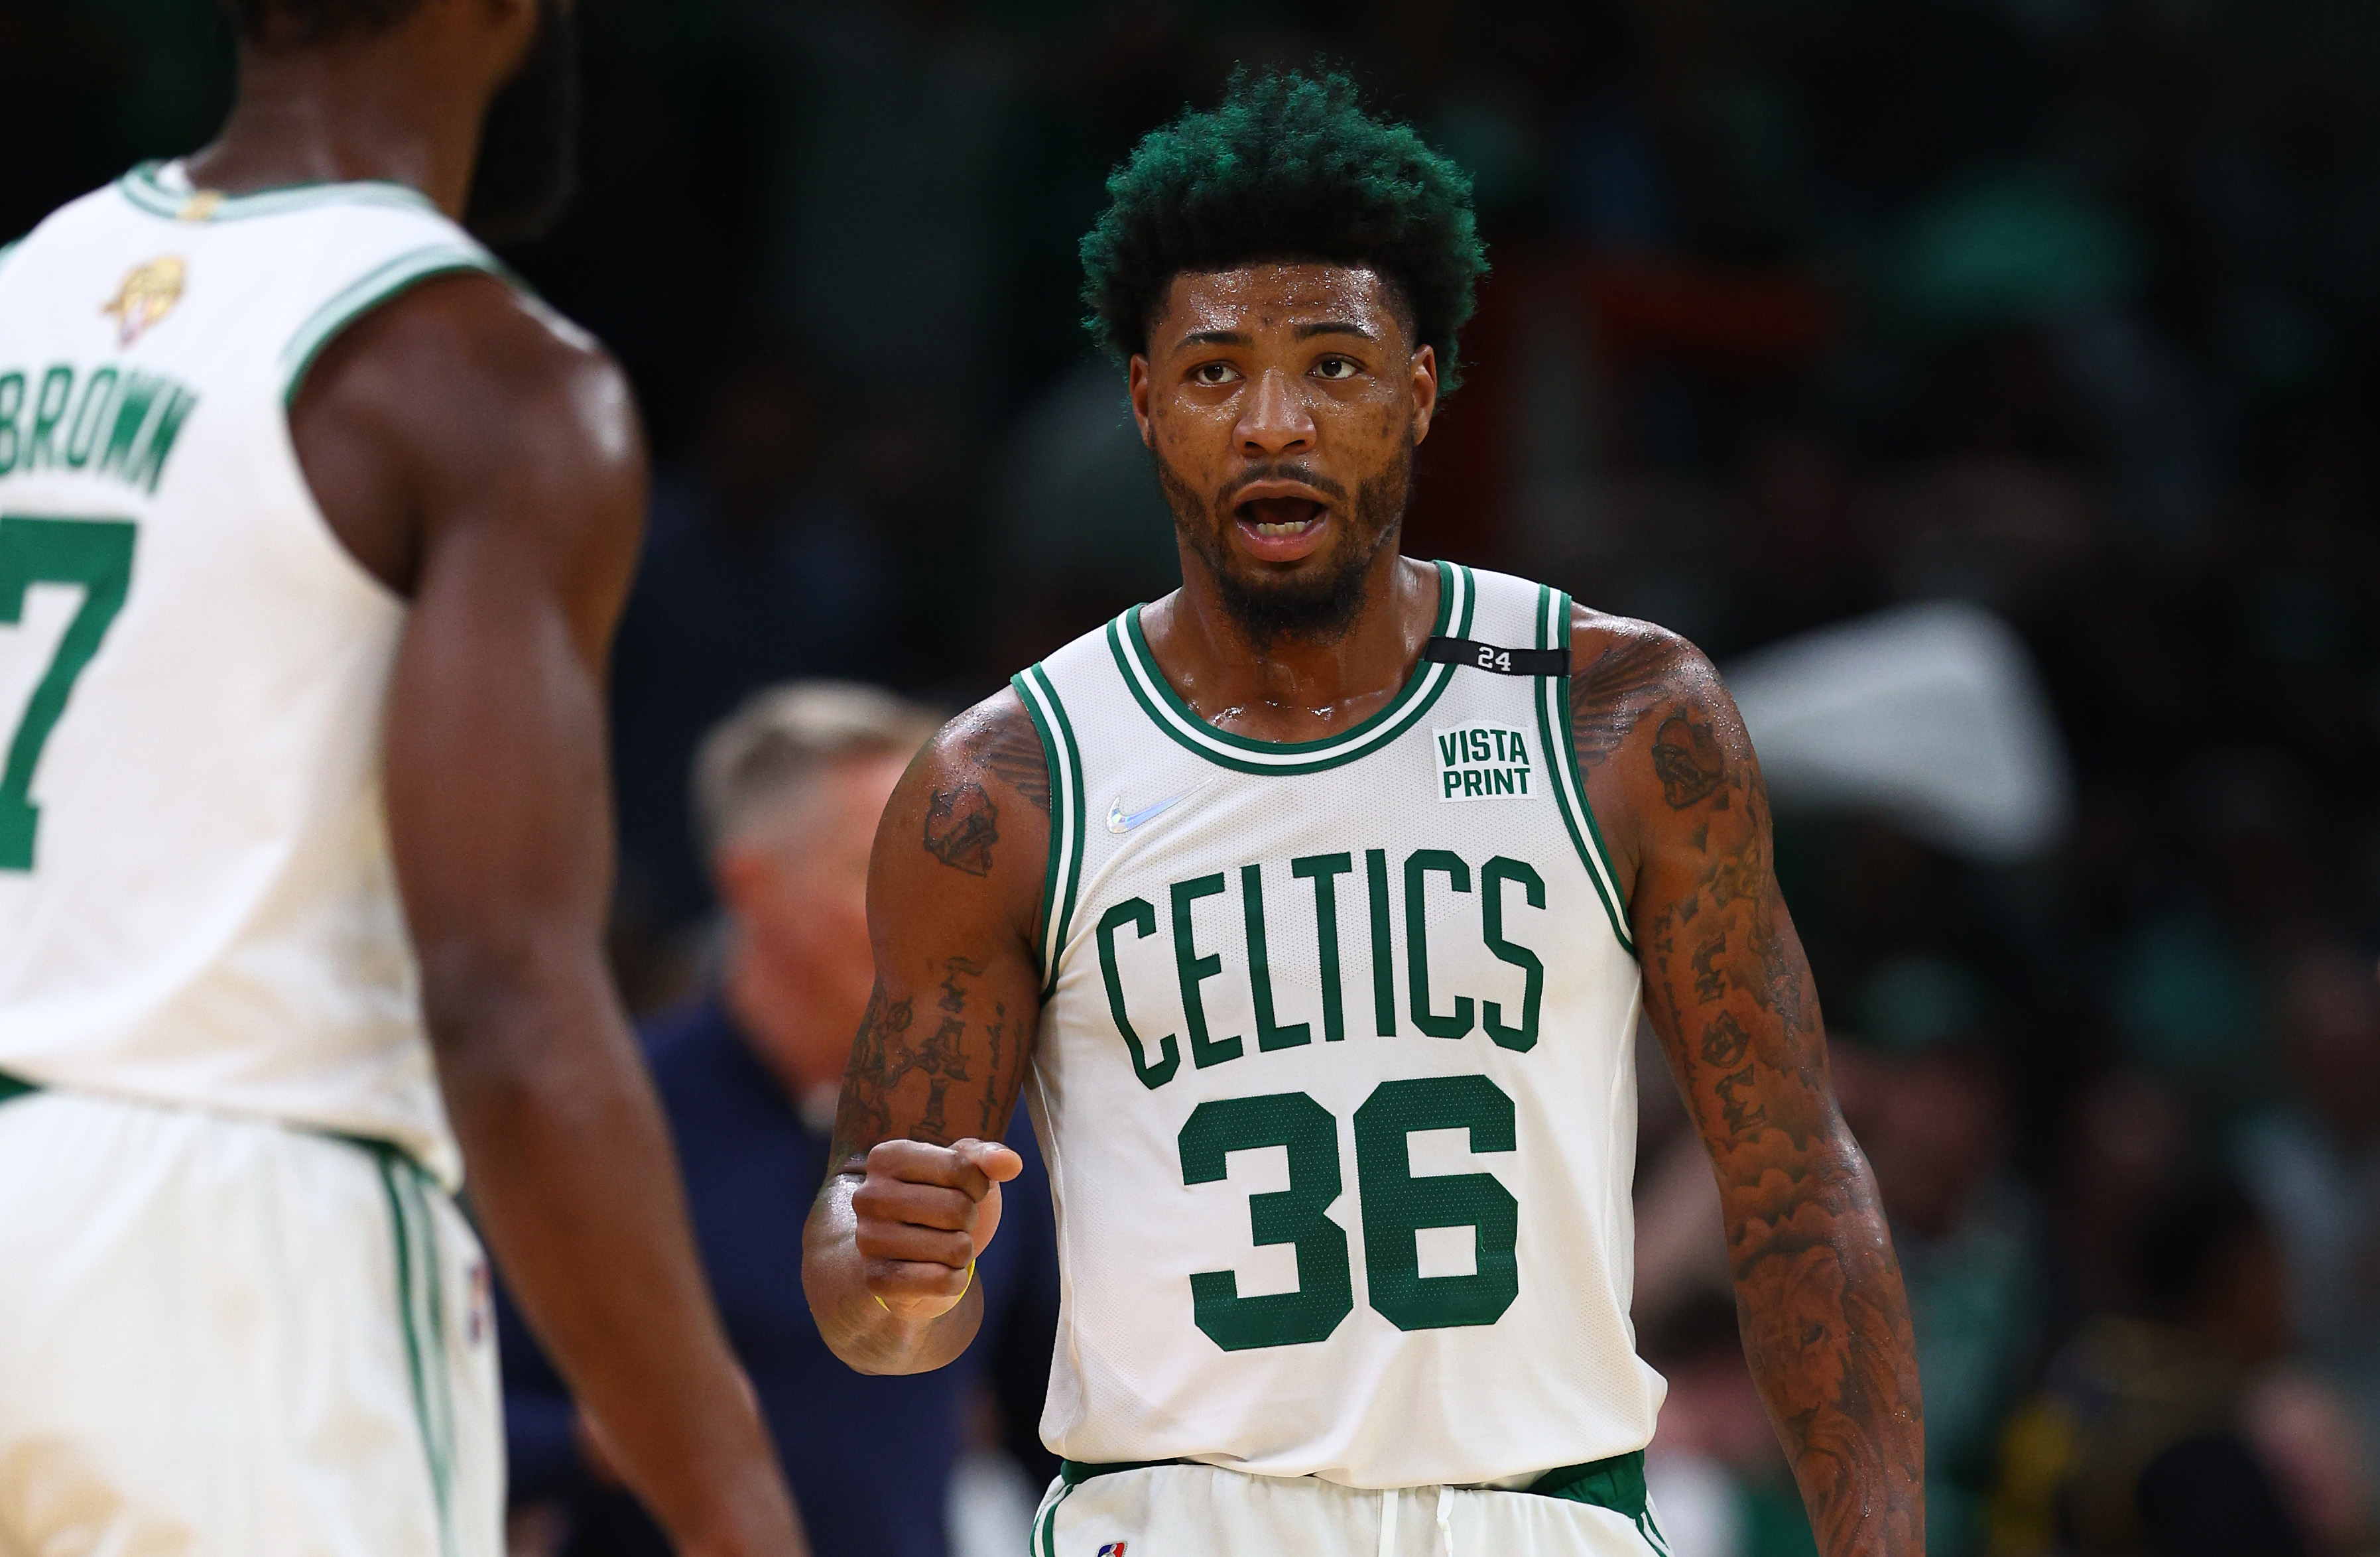 Marcus Smart of the Boston Celtics reacts to a play in the third quarter against the Golden State Warriors.